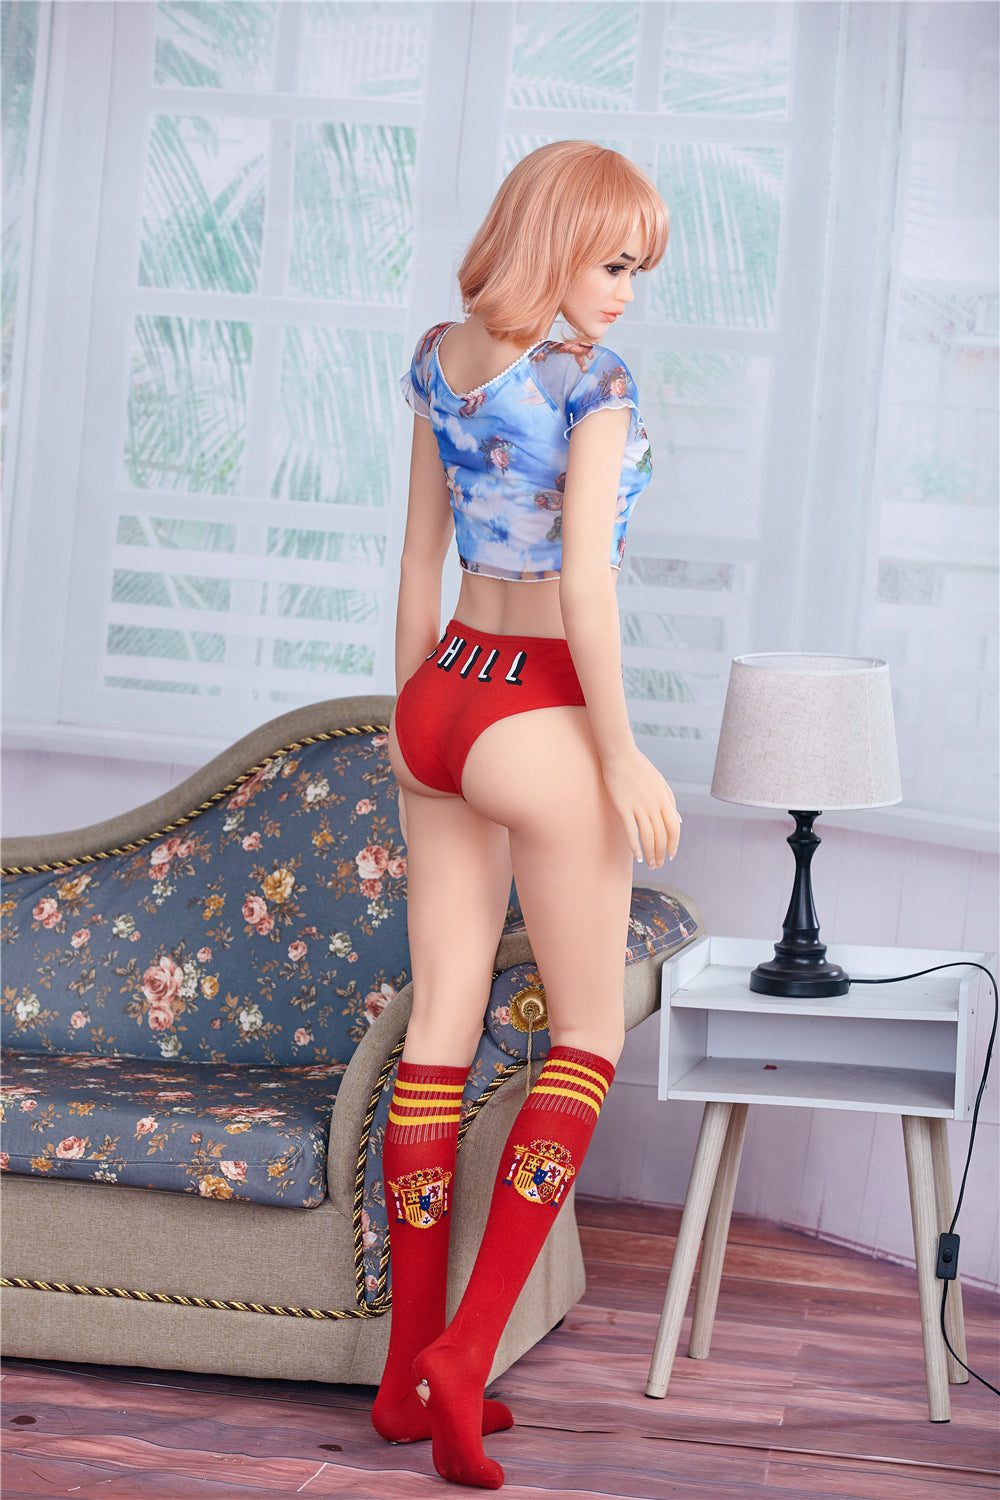 Irontech Doll 165 cm A TPE - Raelyn | Buy Sex Dolls at DOLLS ACTUALLY